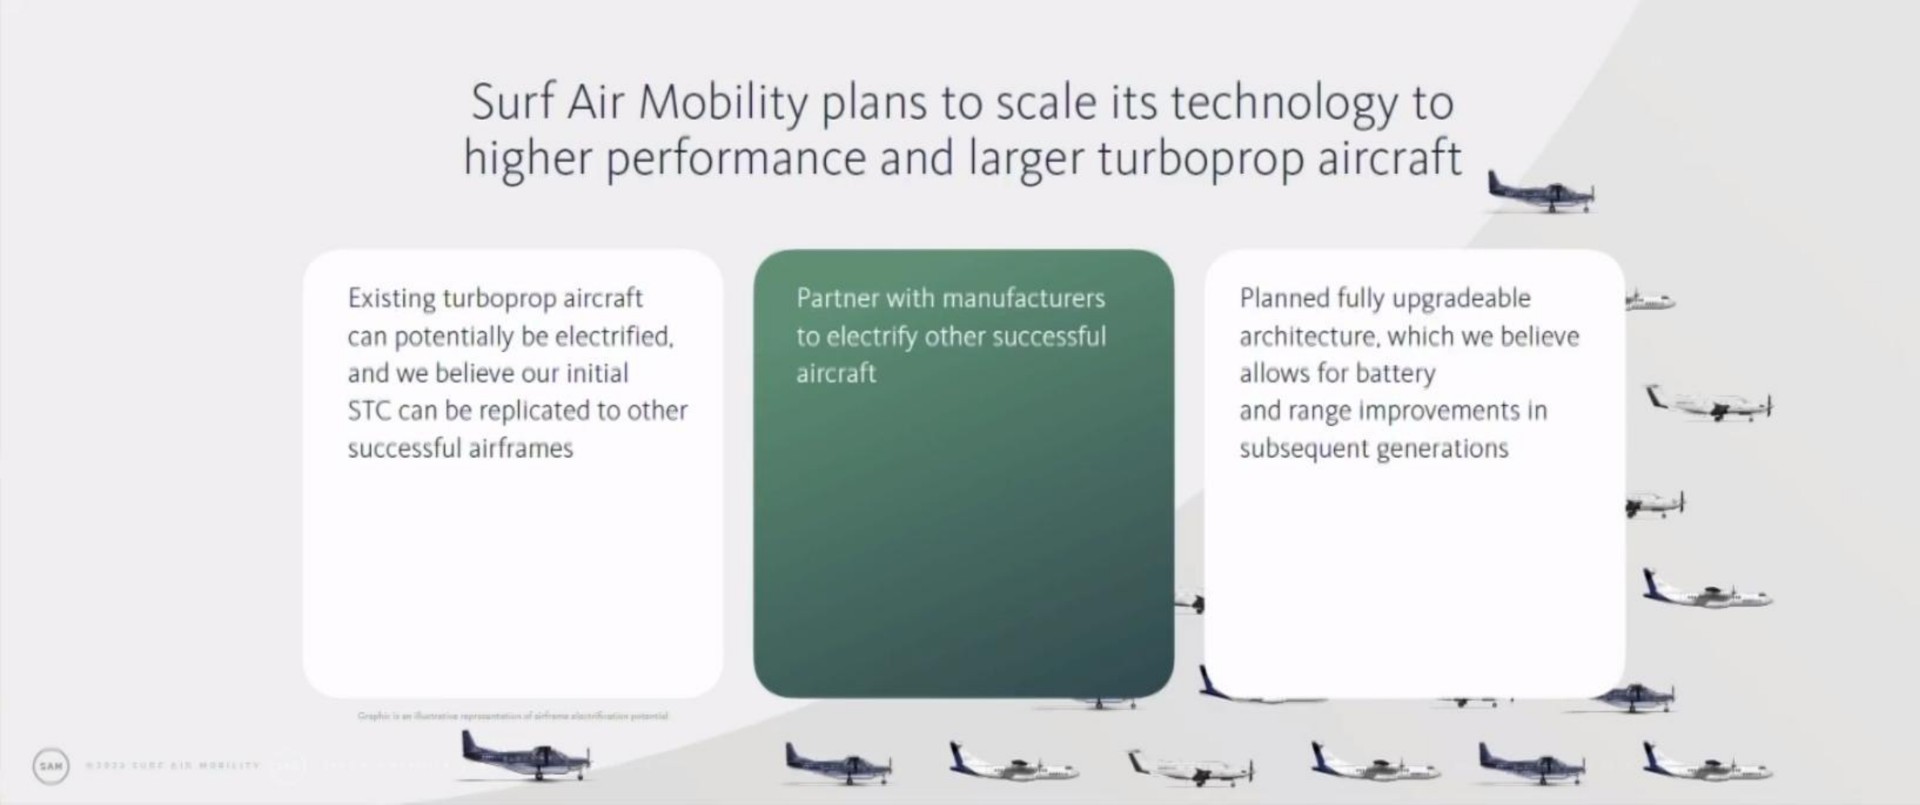 surf air mobility plans to scale its technology to higher performance and aircraft planned fully architecture which we believe partner with manufacturers to electrify other successful aircraft bap allows for battery and range improvements in subsequent generations existing aircraft can potentially be electrified and we believe our initial can be replicated to other successful airframes | Surf Air